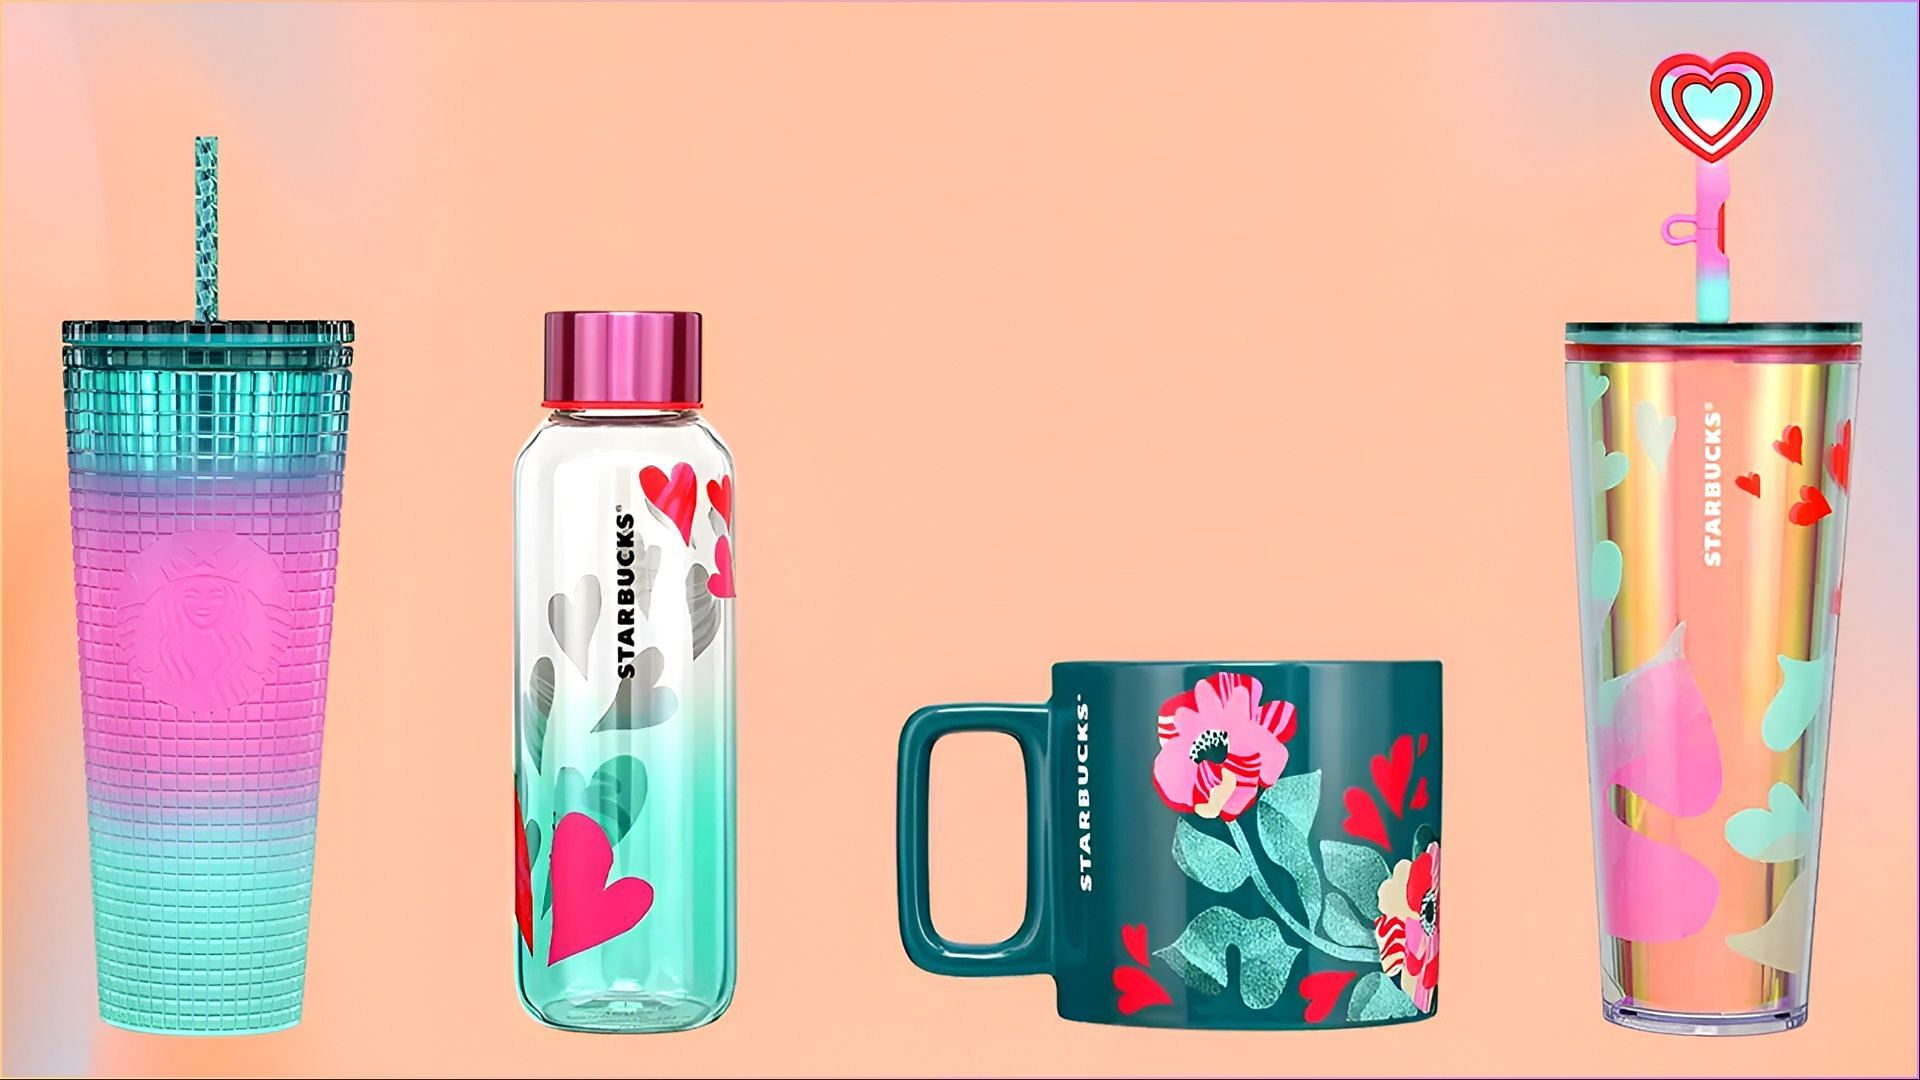 The new Valentine-themed drinkware comes in floral and heart themes (Image via Starbucks)